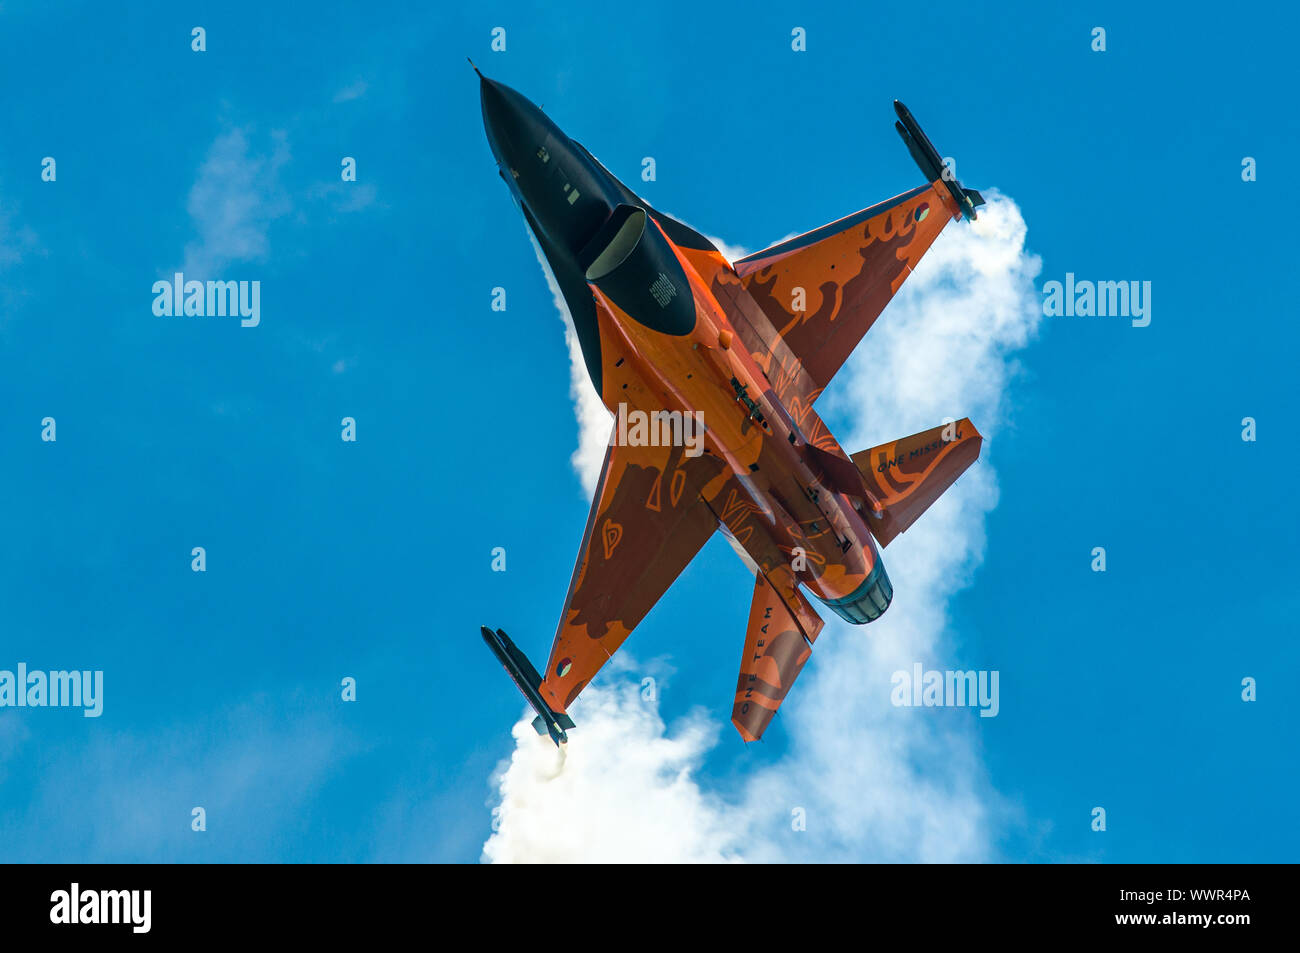 A Lockheed Martin F-16 of the Koninklijke Luchtmacht (KLu)/Royal Netherlands Air Force (RNLAF) performs an aerobatic routine at RAF Waddington. Stock Photo